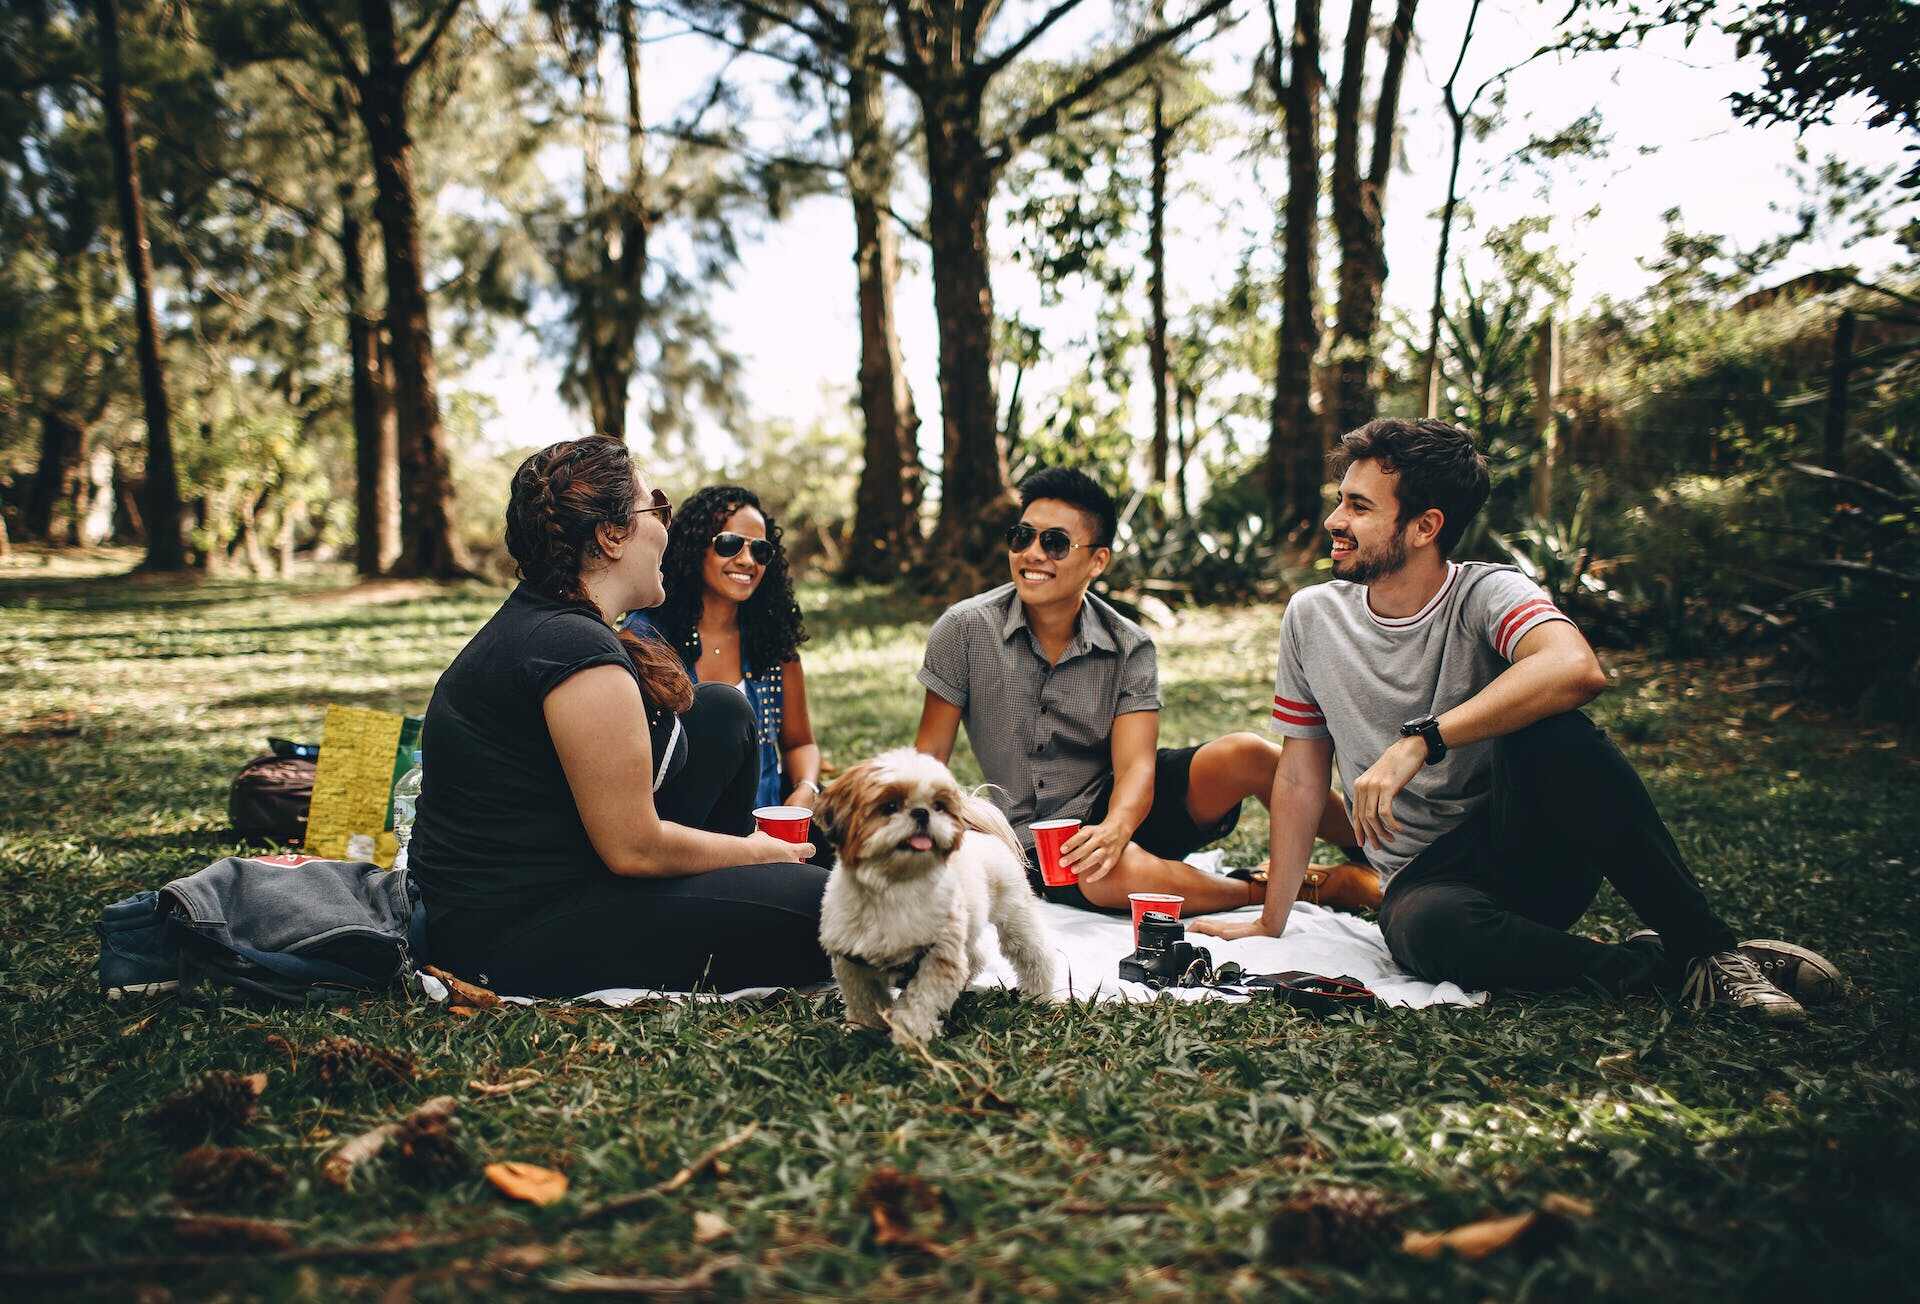 A group of people sitting in a park with a dog